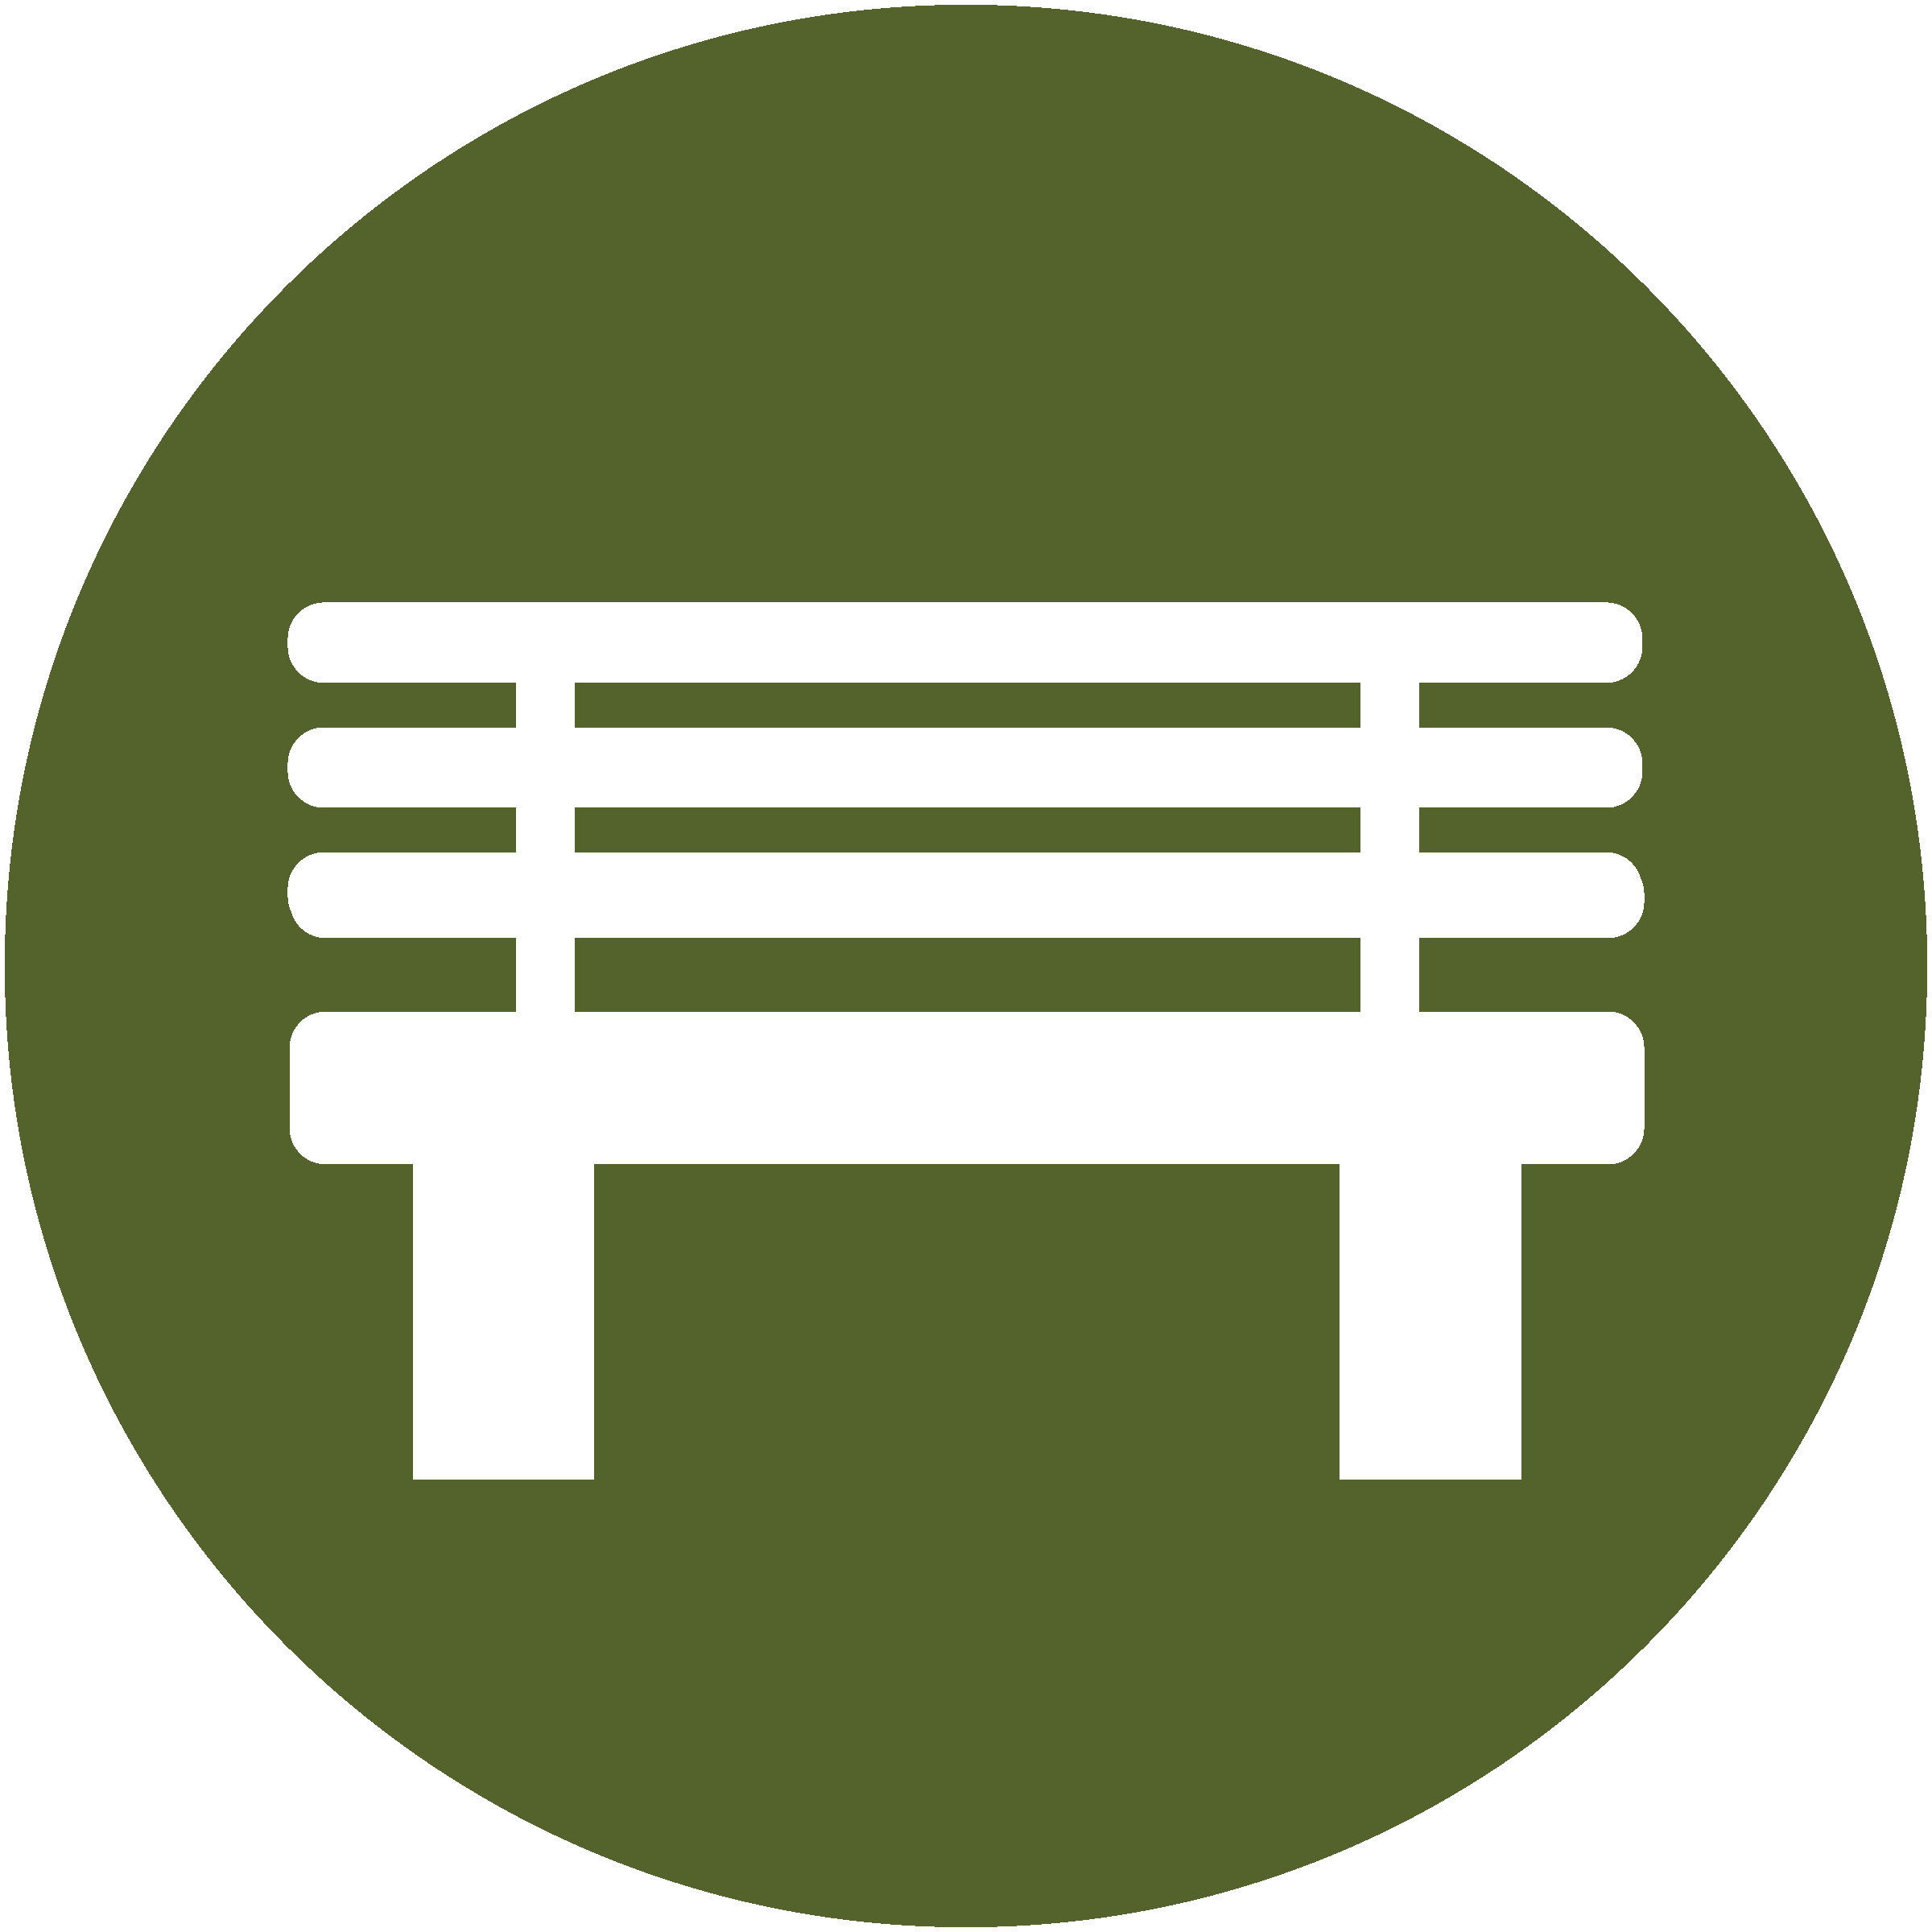 icon of park bench